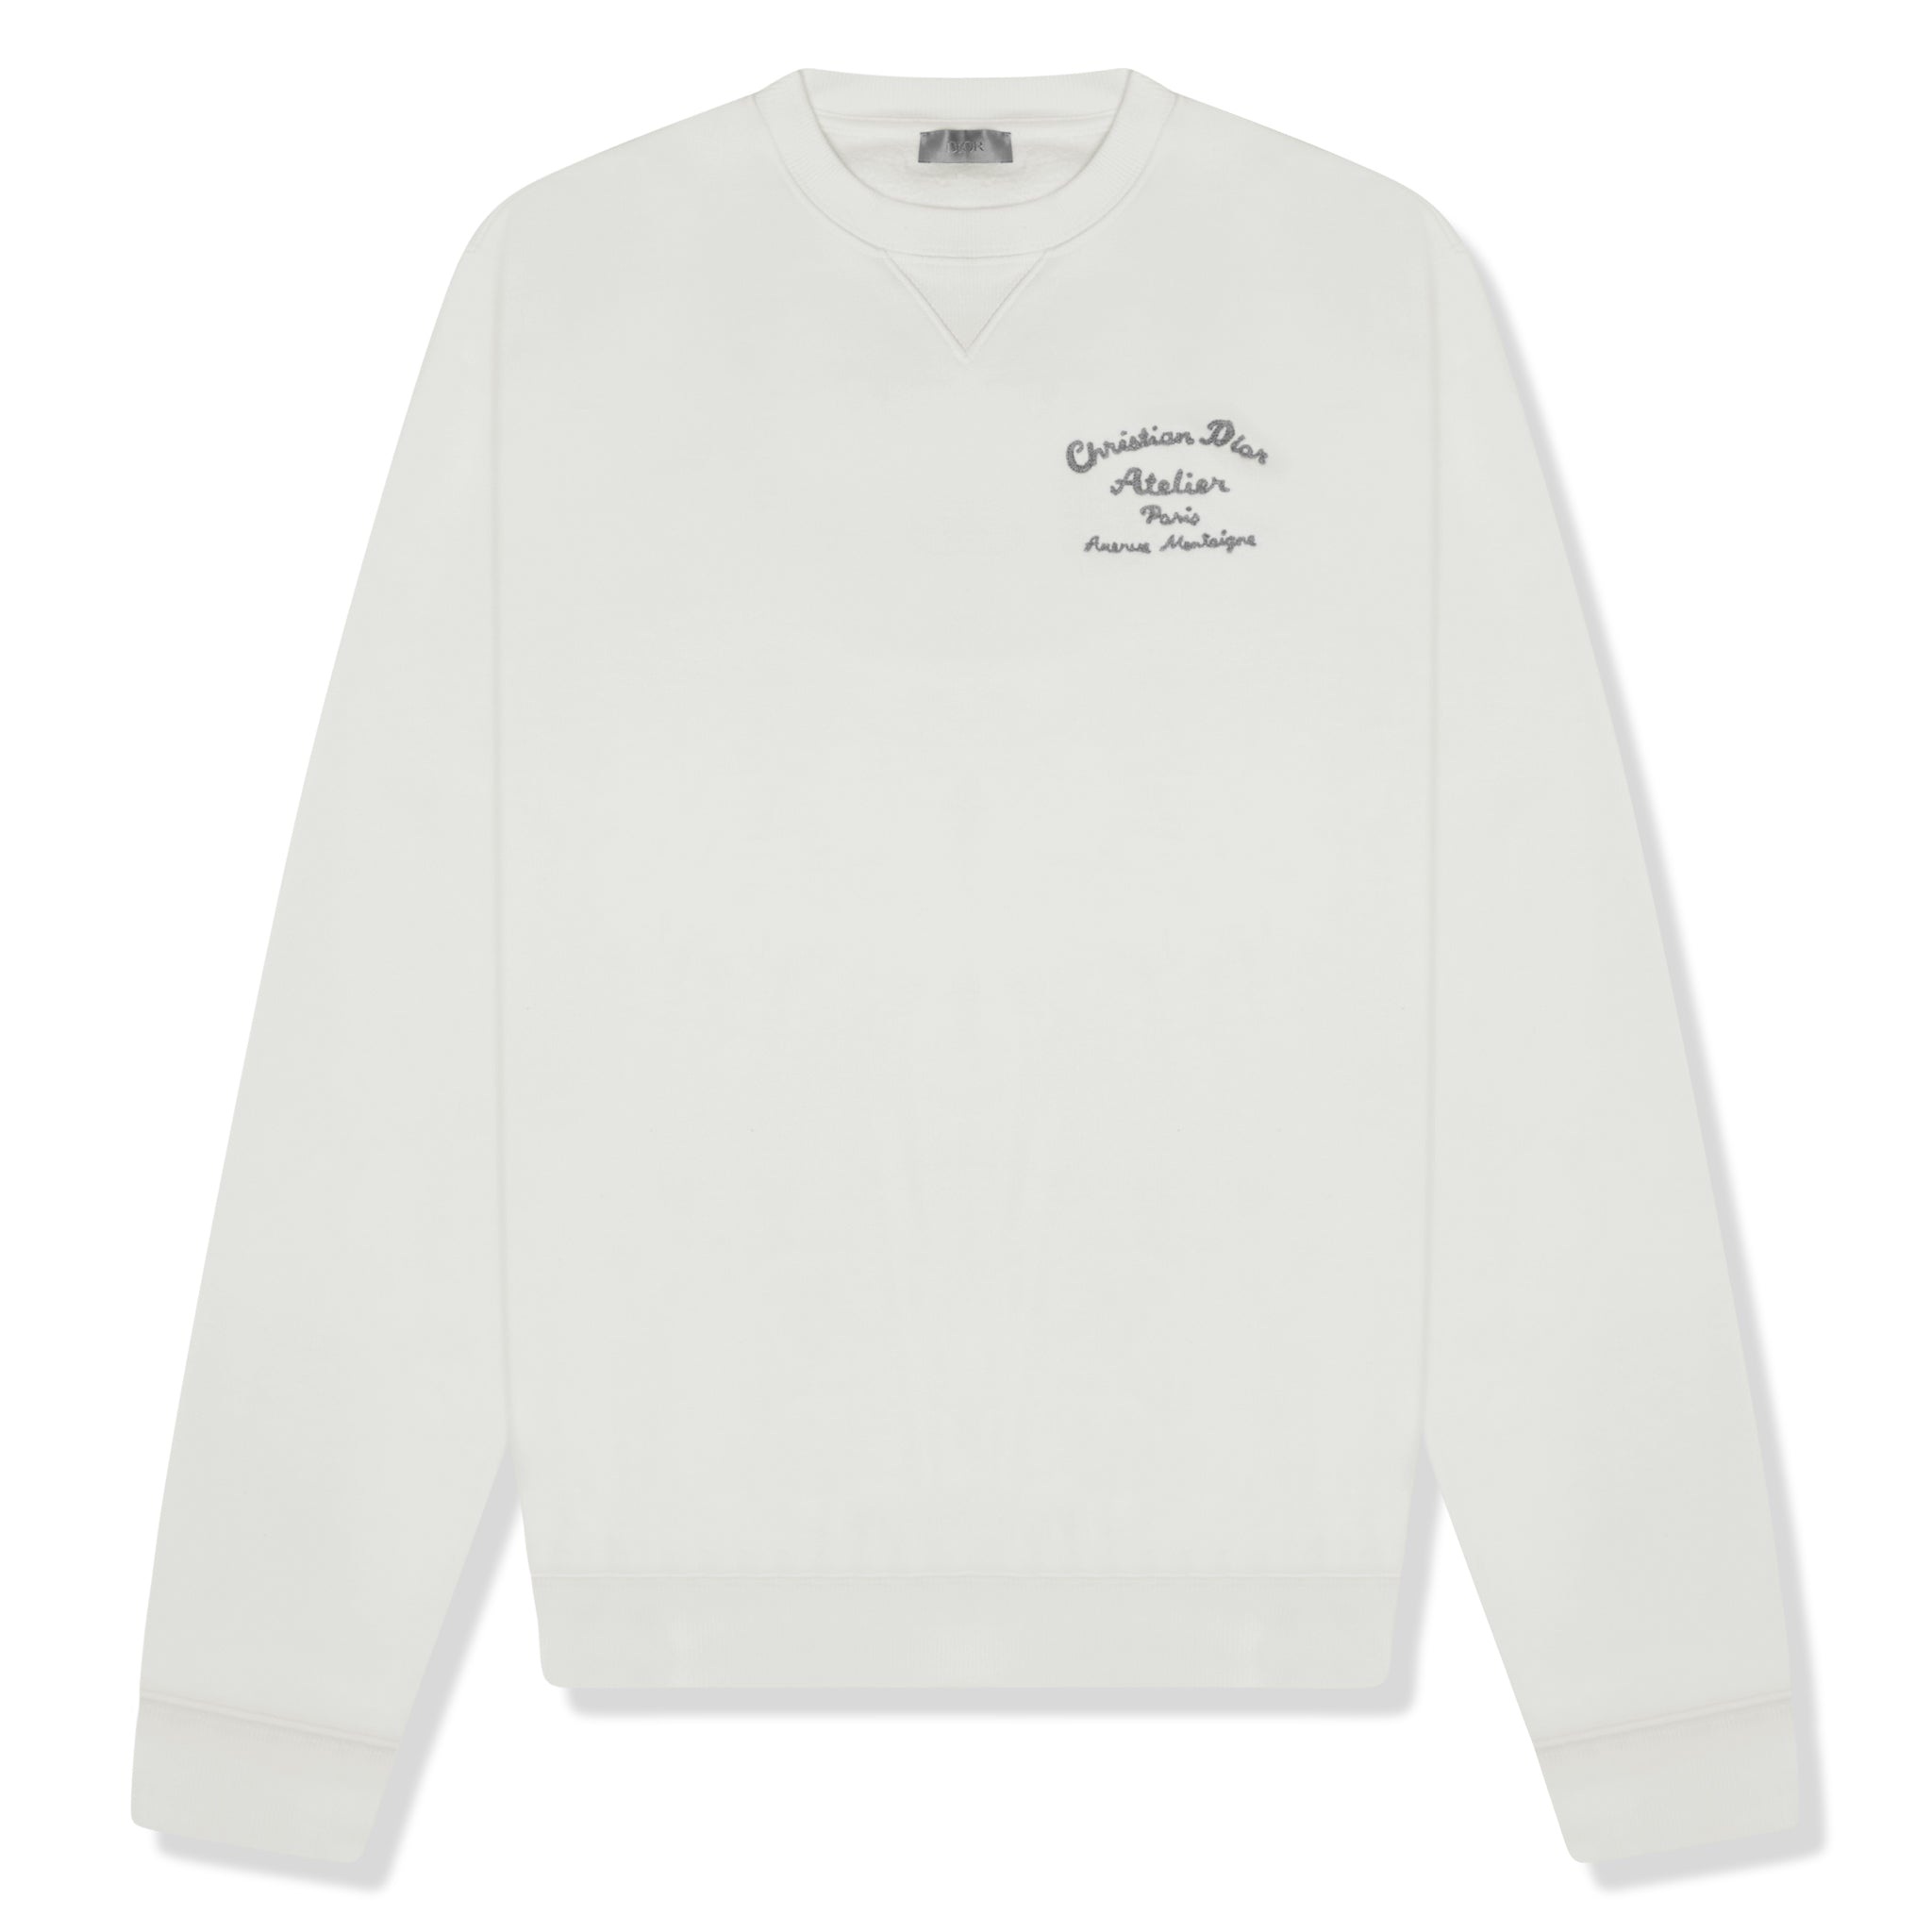 Front view of Dior 'Christian Dior Atelier' Sweatshirt White 293J699A0531